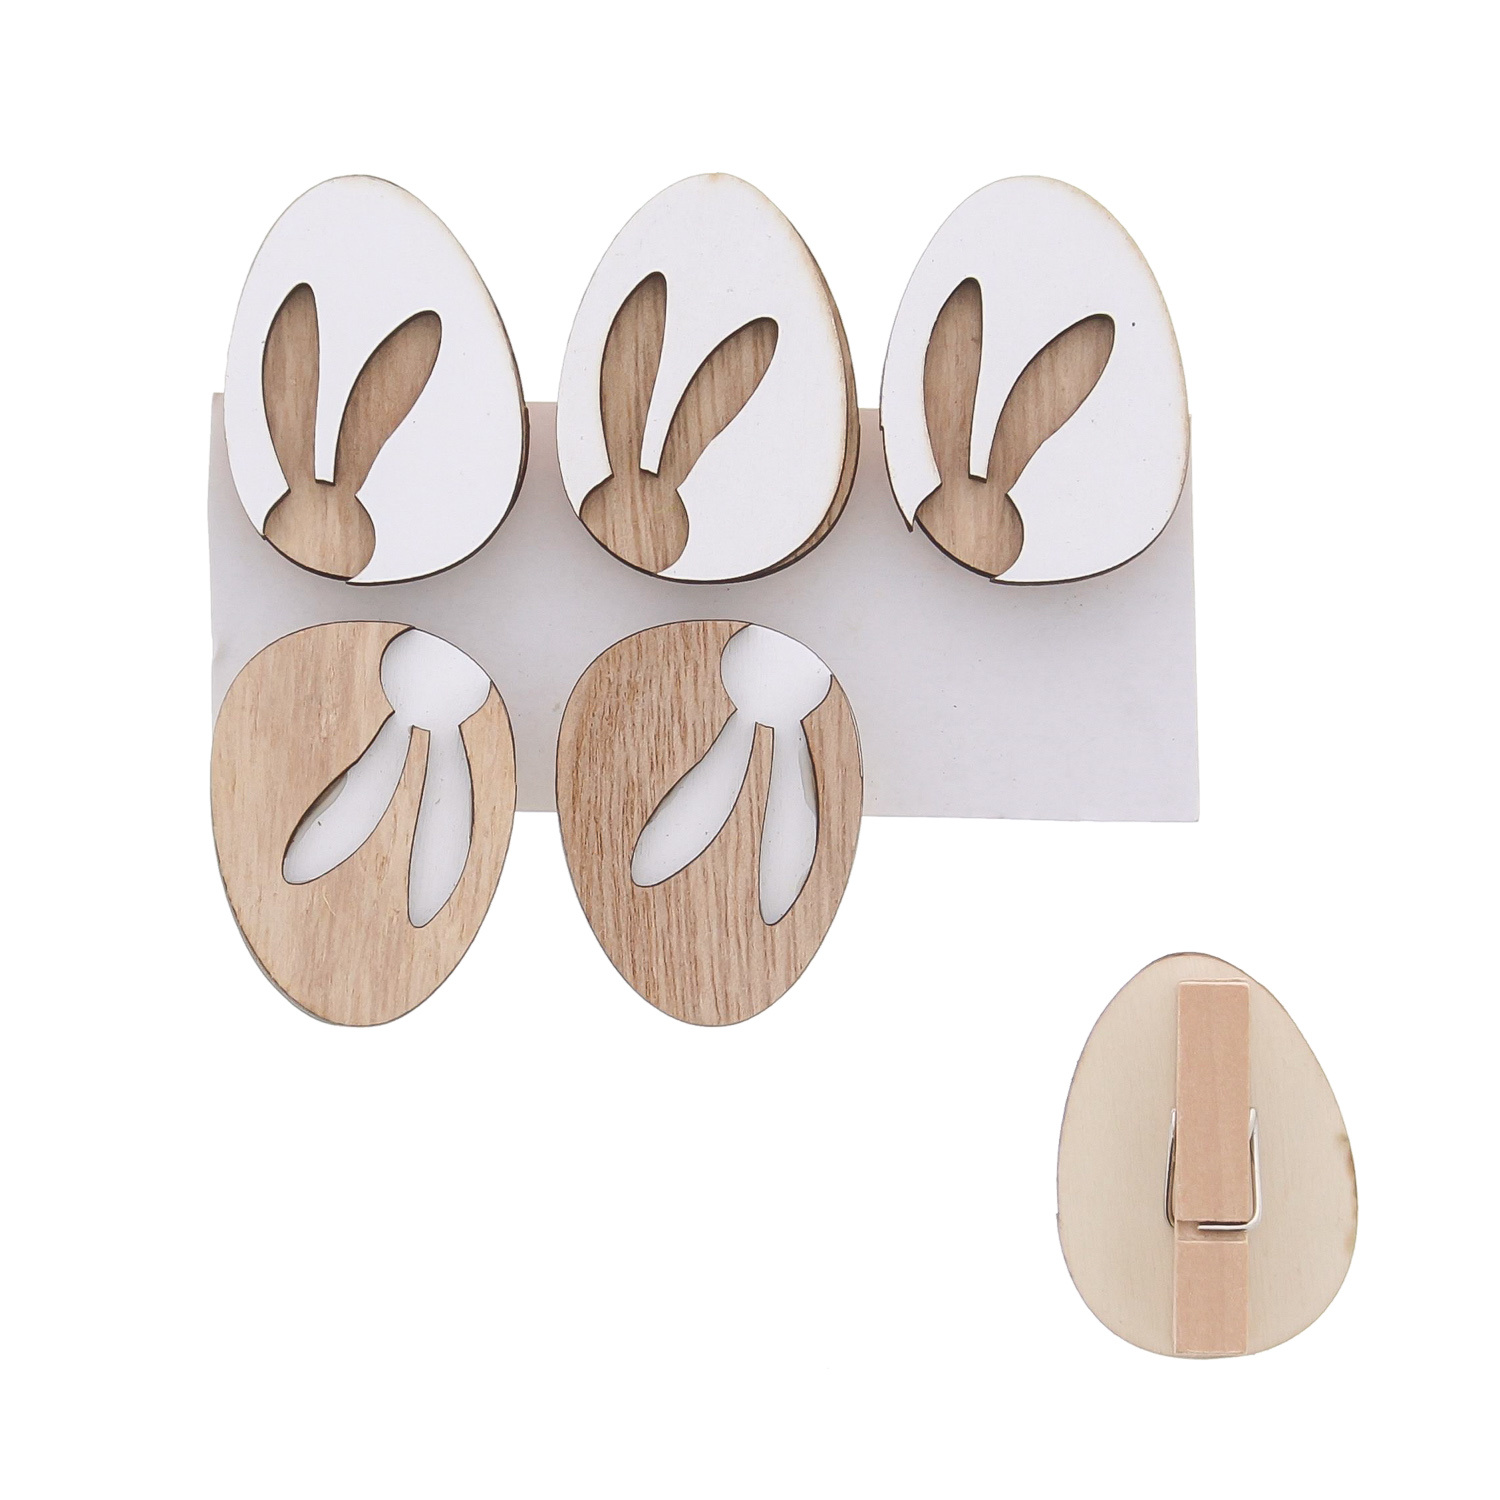 Rabbit in egg squeezer white and natural wood - 30*15*40mm - 36 pieces